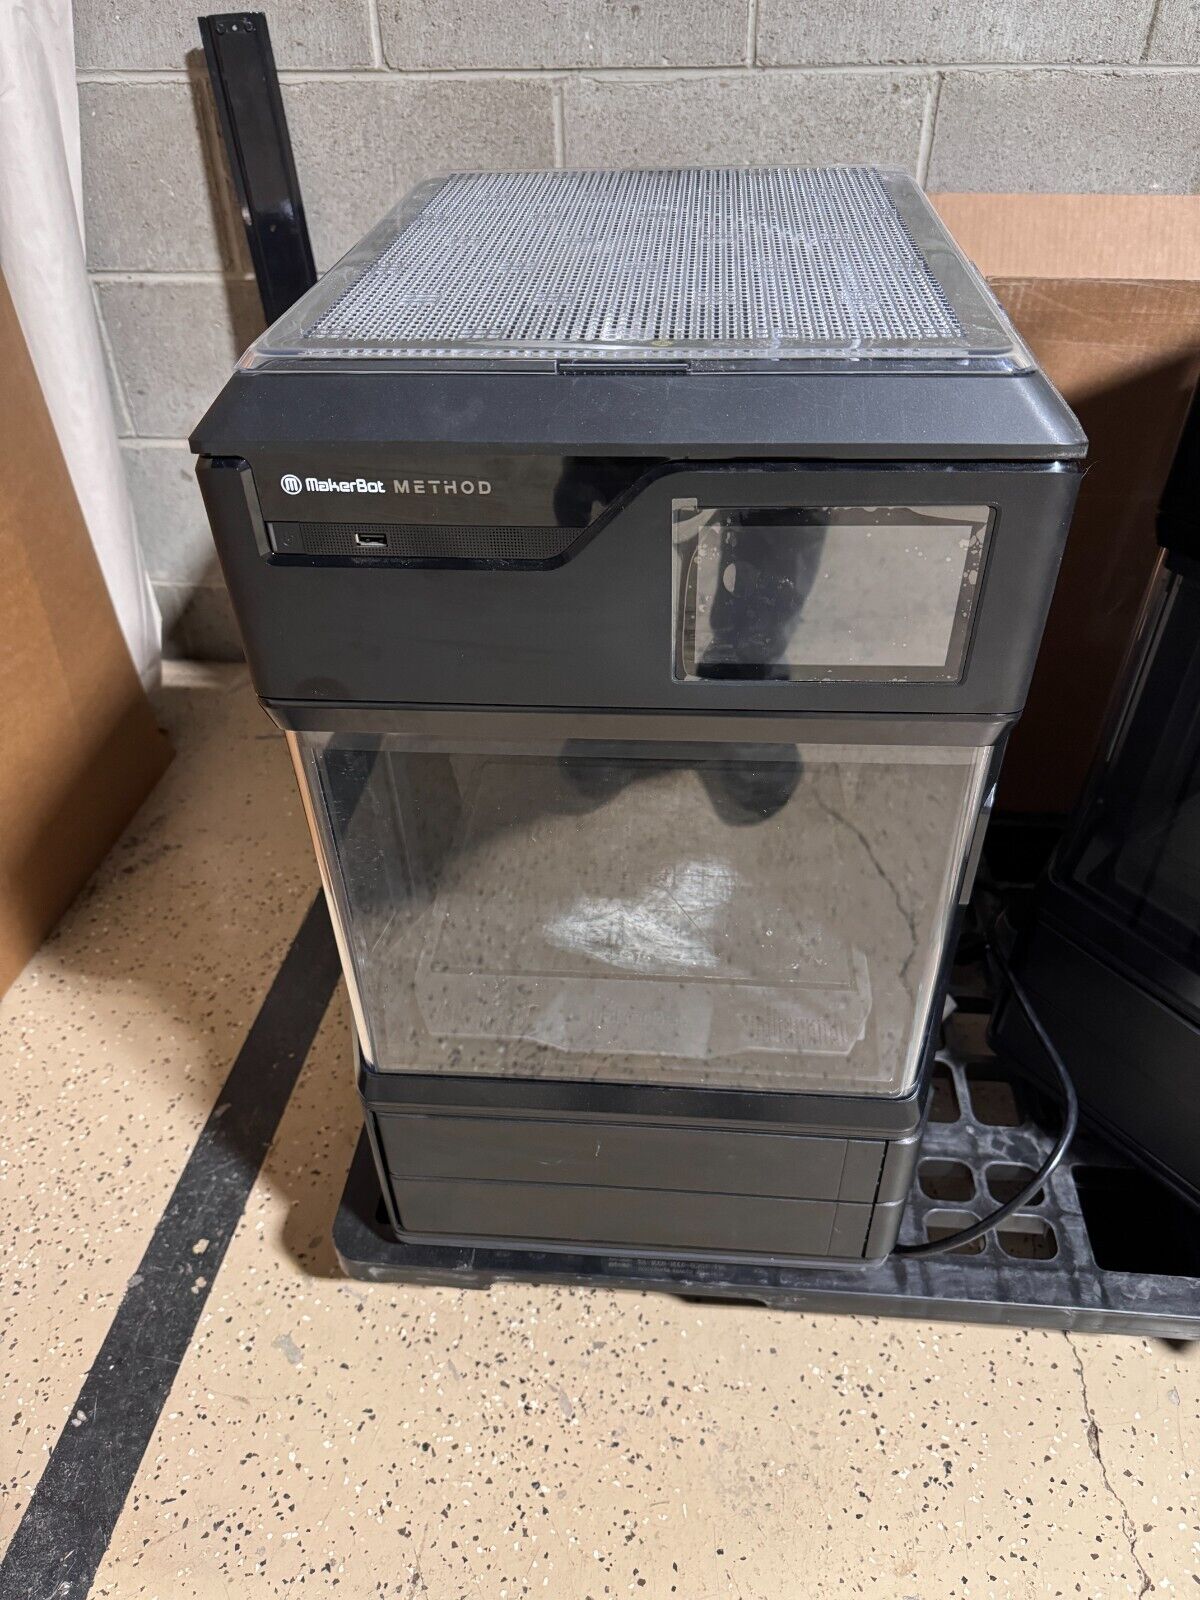 Makerbot Method 3D Printer with extras - Used